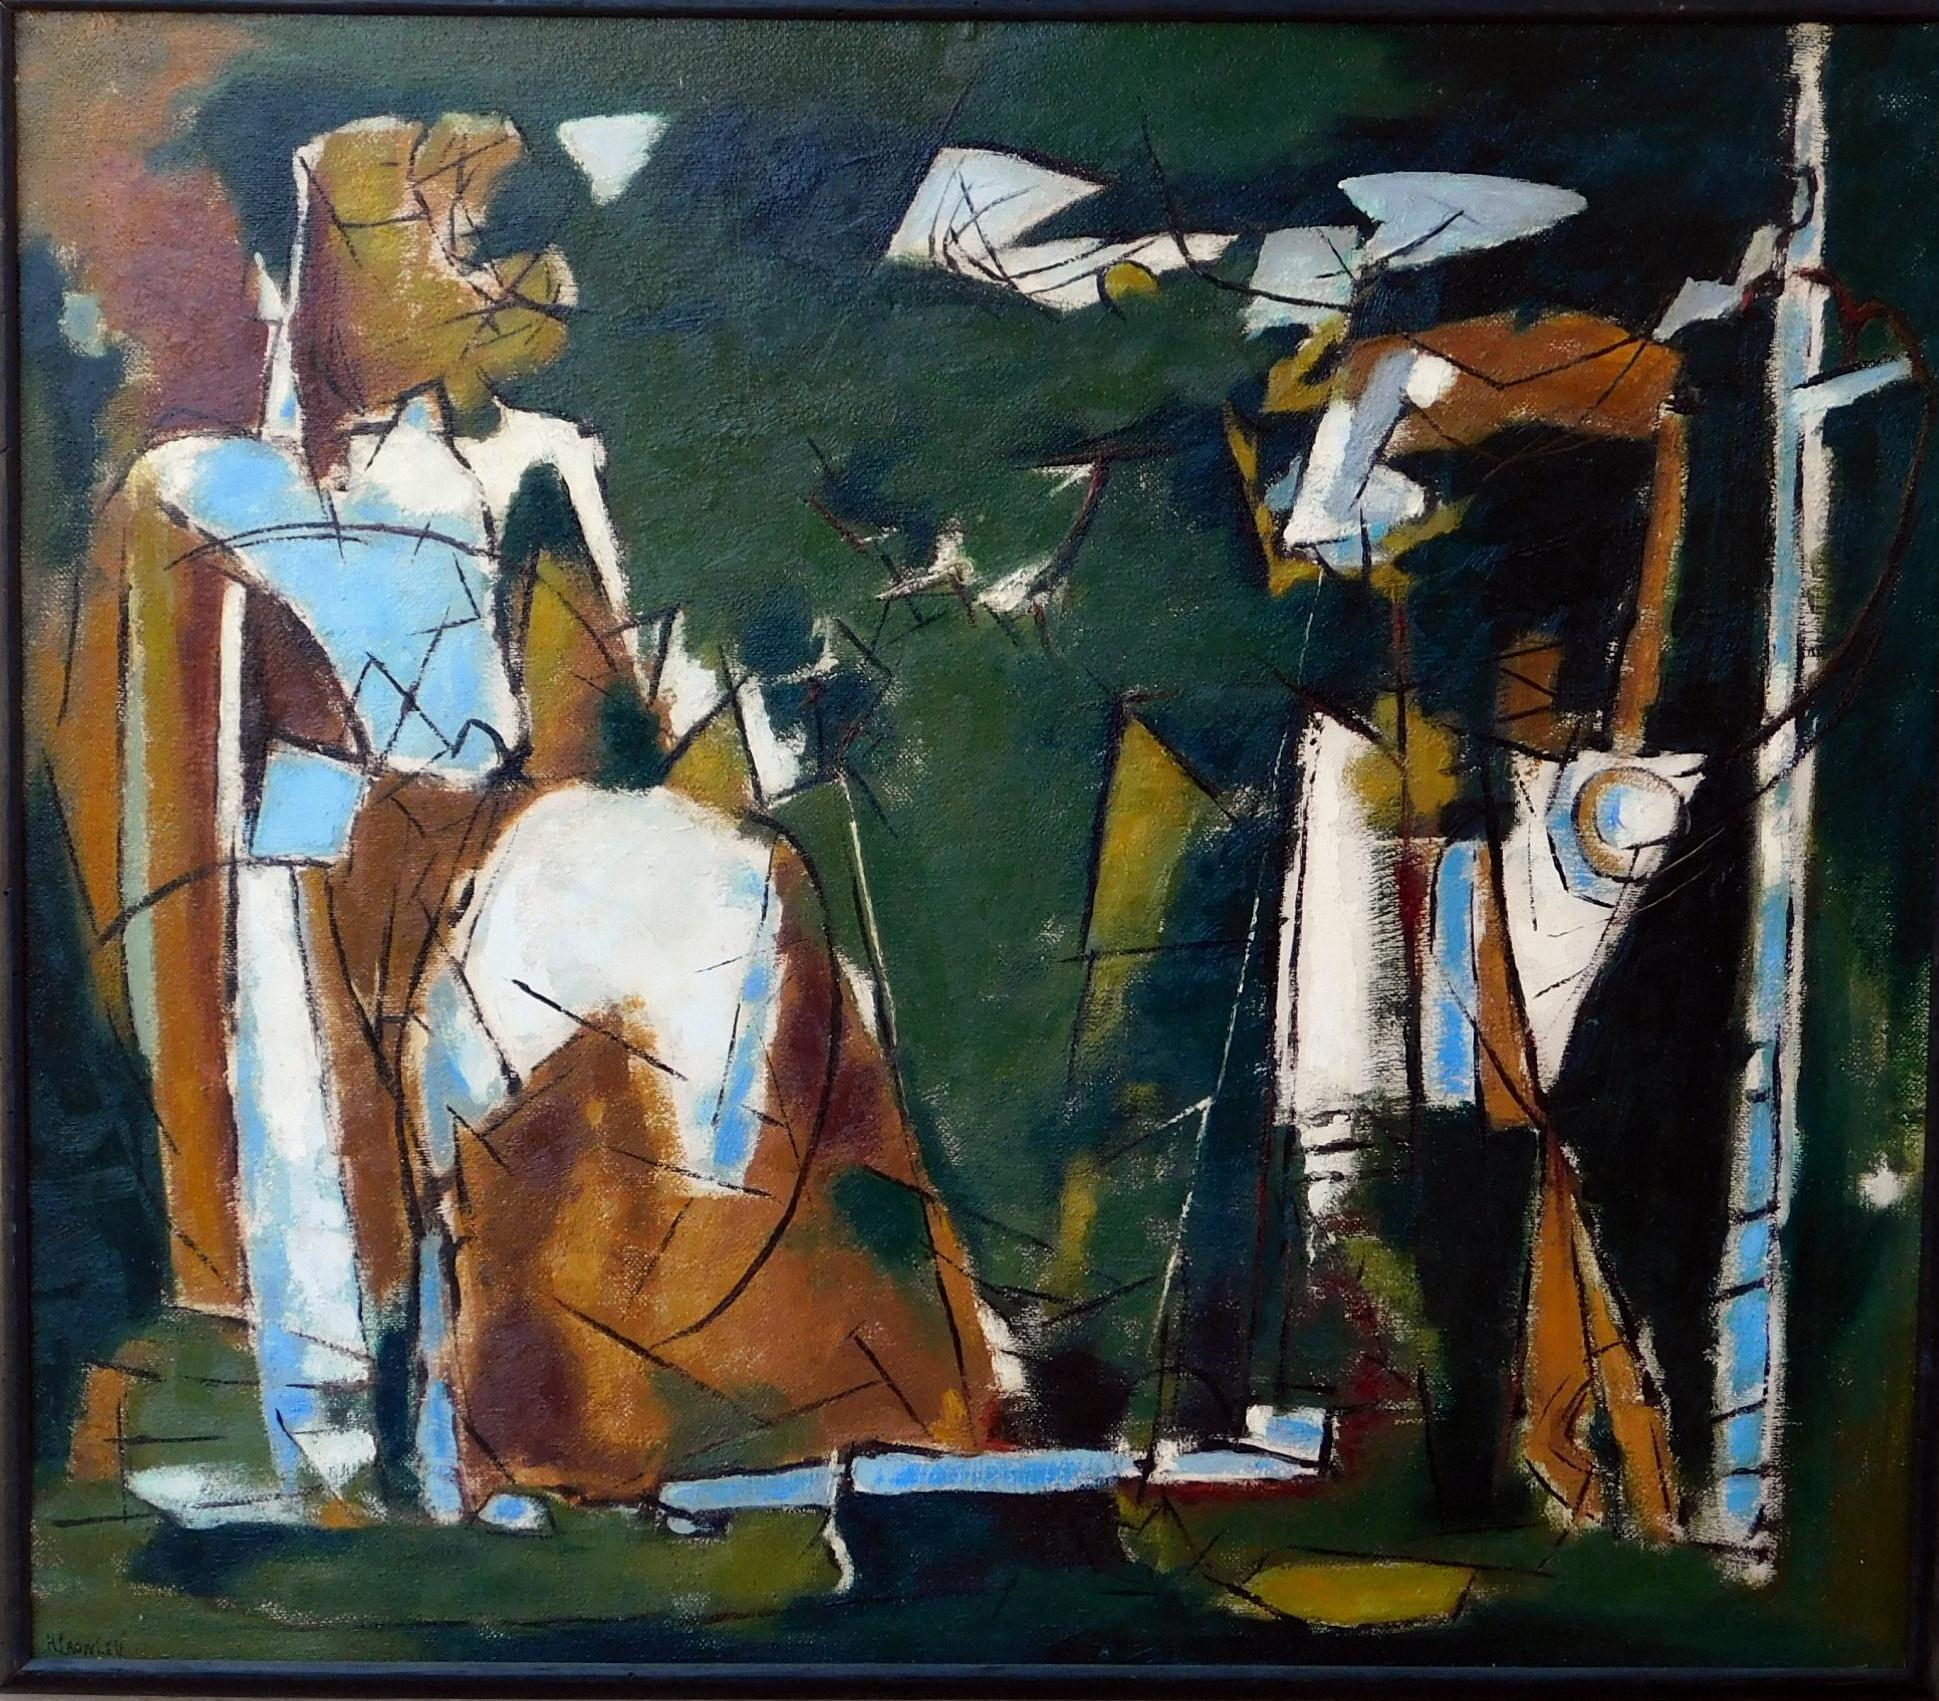 Harry Crowley (1898-1979) oil on board, 1954. Abstract Expressionist. Titled on the verso “Slow Solitude.” 
Measures: 33 x 38. Frame: 42 x 47. In excellent condition and in the original frame.
Beautiful abstract design in greens, browns and blues.